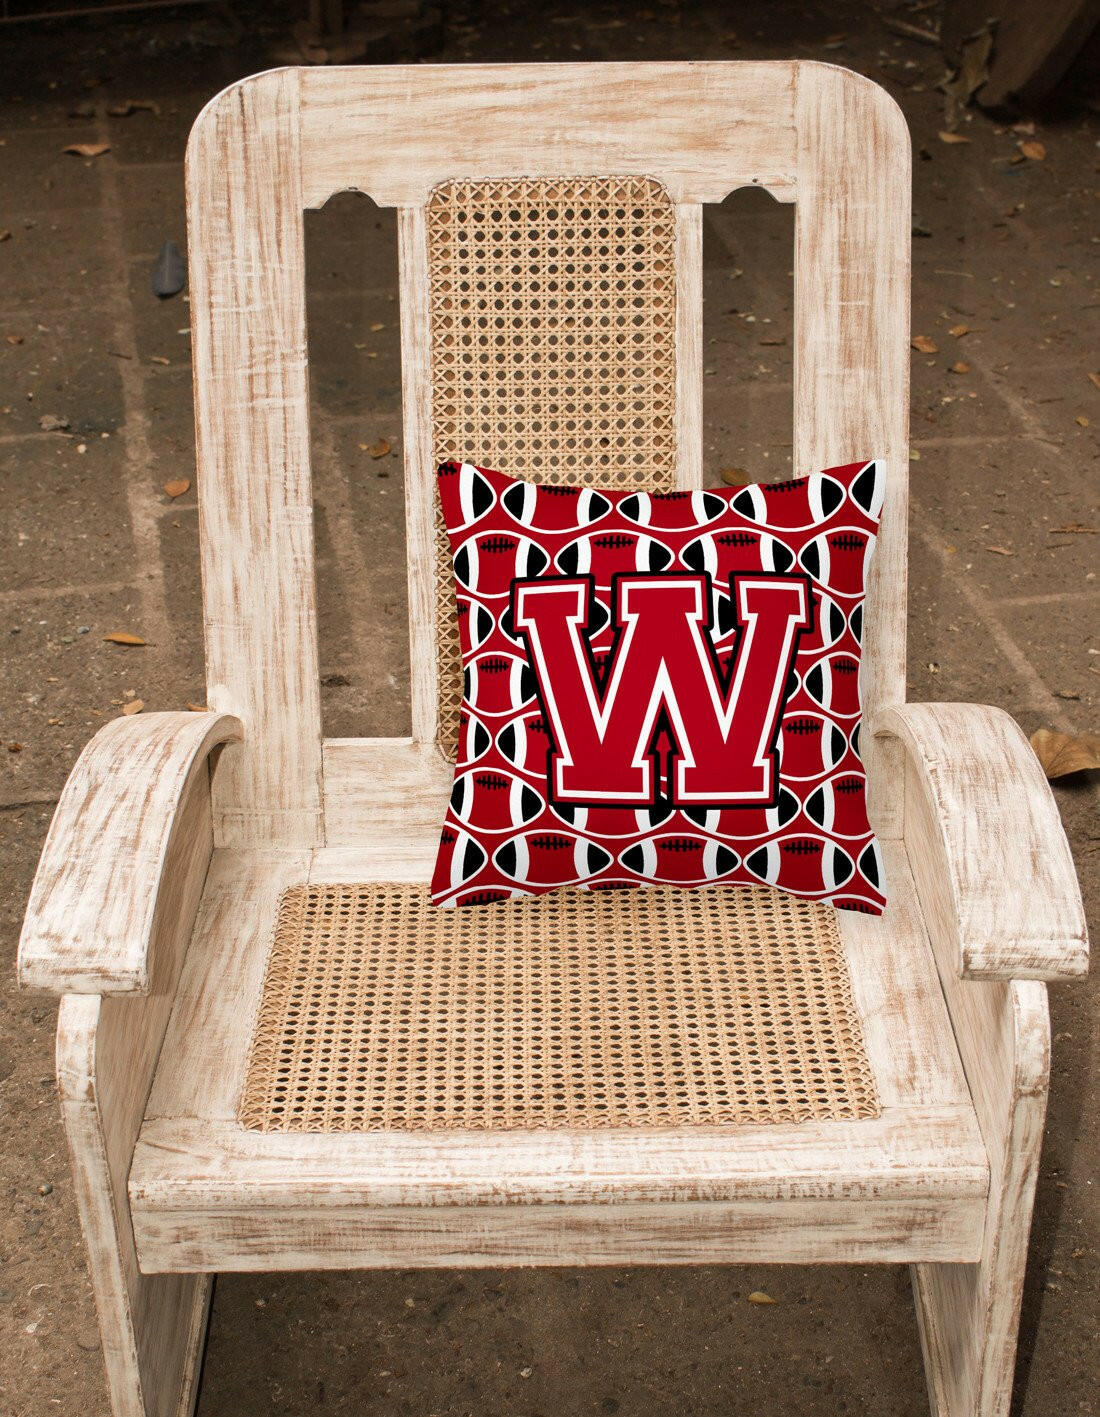 Letter W Football Red, Black and White Fabric Decorative Pillow CJ1073-WPW1414 by Caroline's Treasures